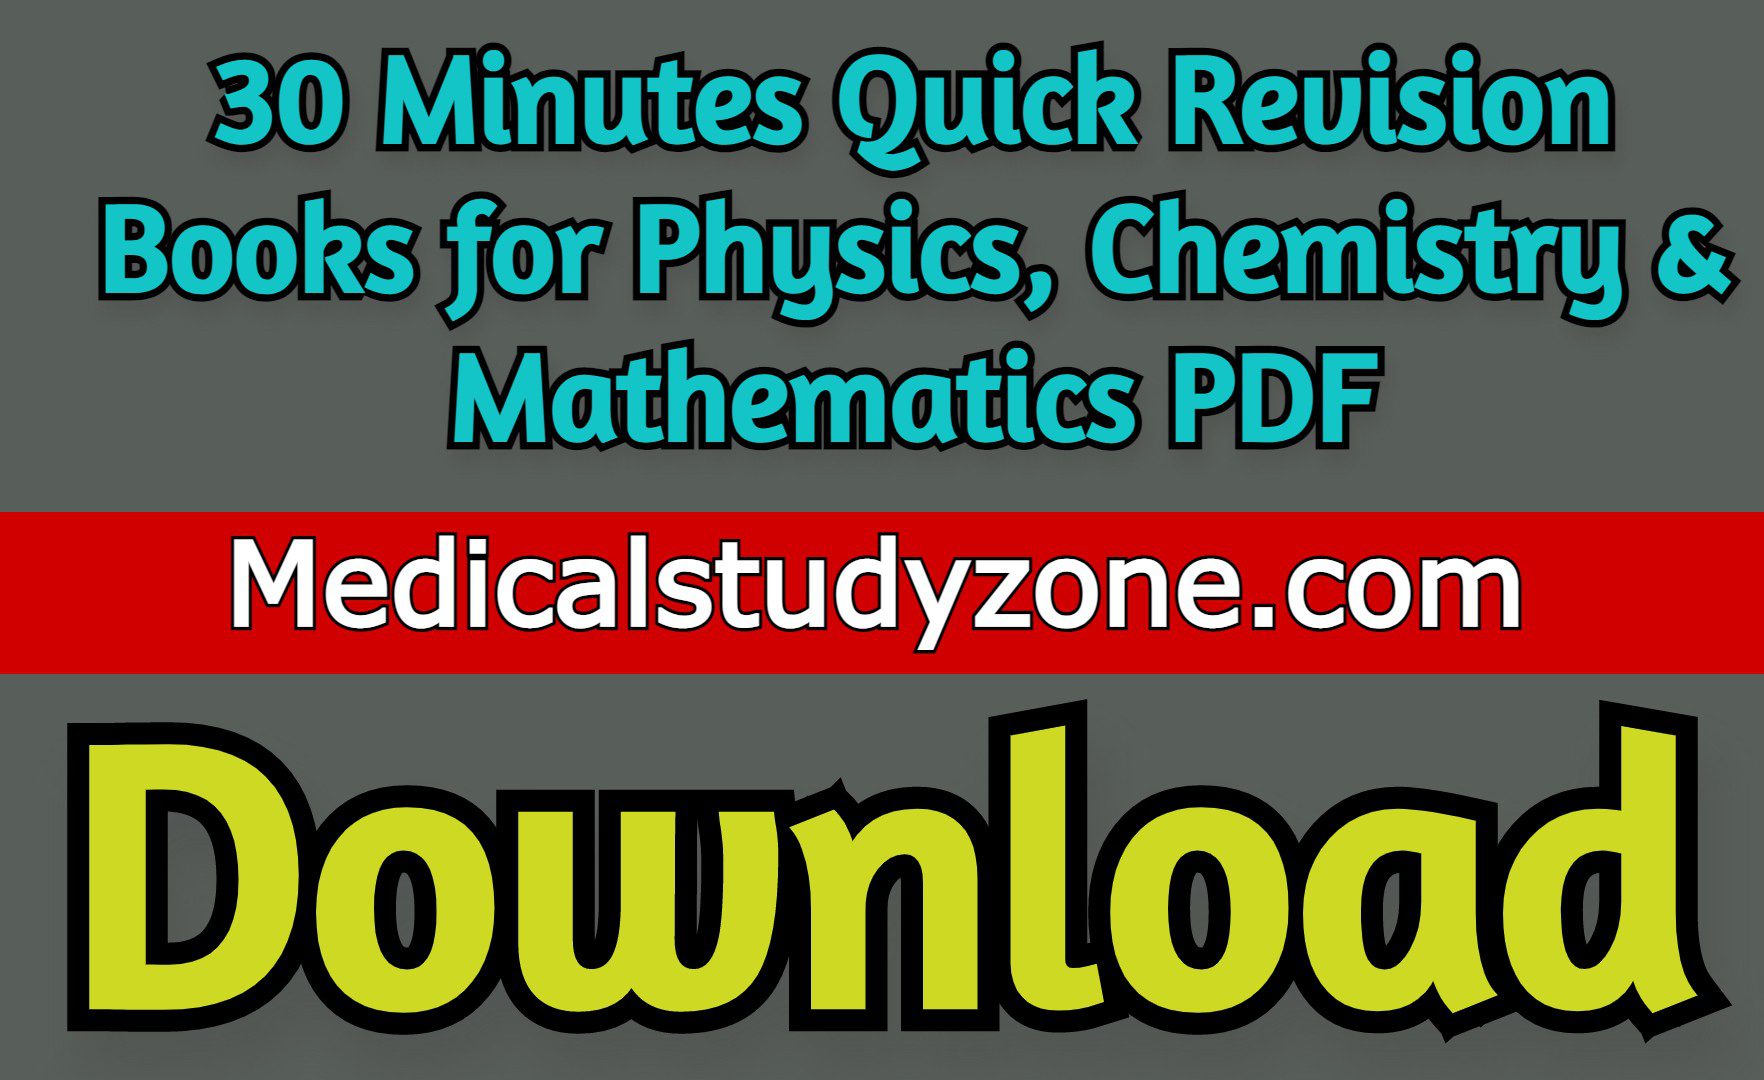 Download 30 Minutes Quick Revision Books for Physics, Chemistry & Mathematics PDF 2020 Free